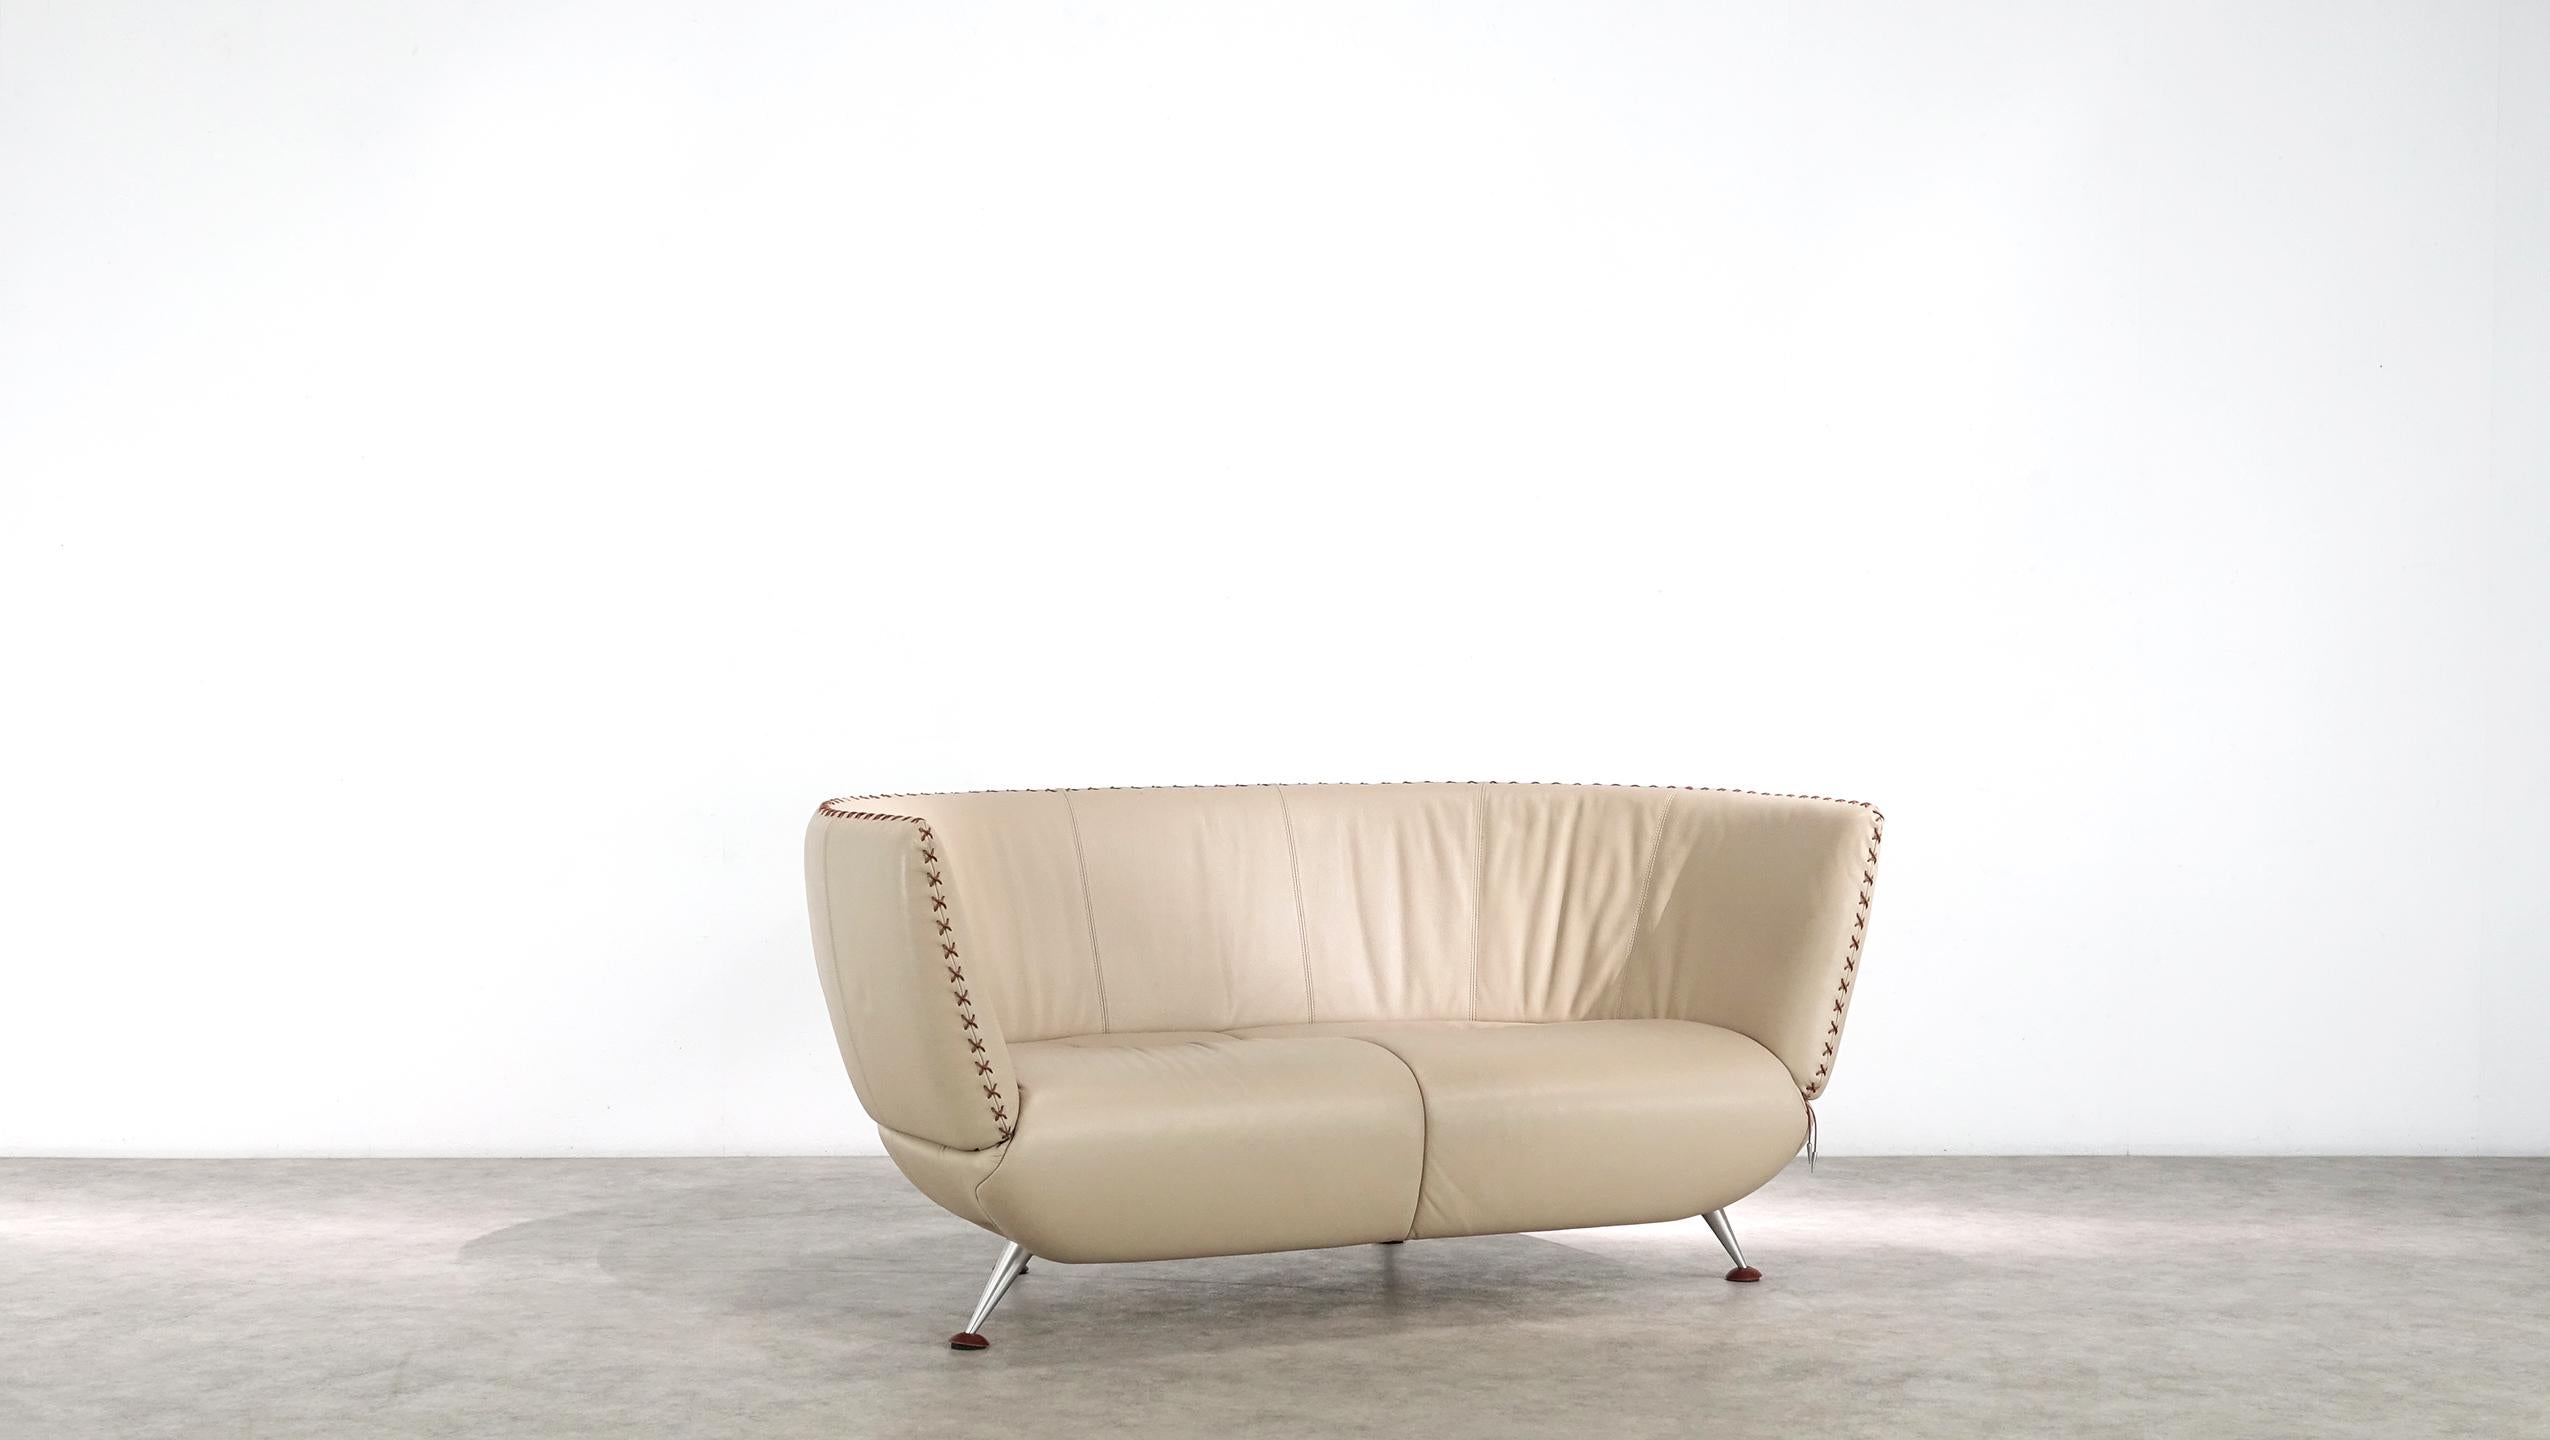 The two-seater from de Sede is upholstered in sand-colored smooth leather and stands on flared, polished aluminum feet with leather caps. With its softly upholstered seat shell, the Recamière sofa invites you to relax in comfort. The X-leather